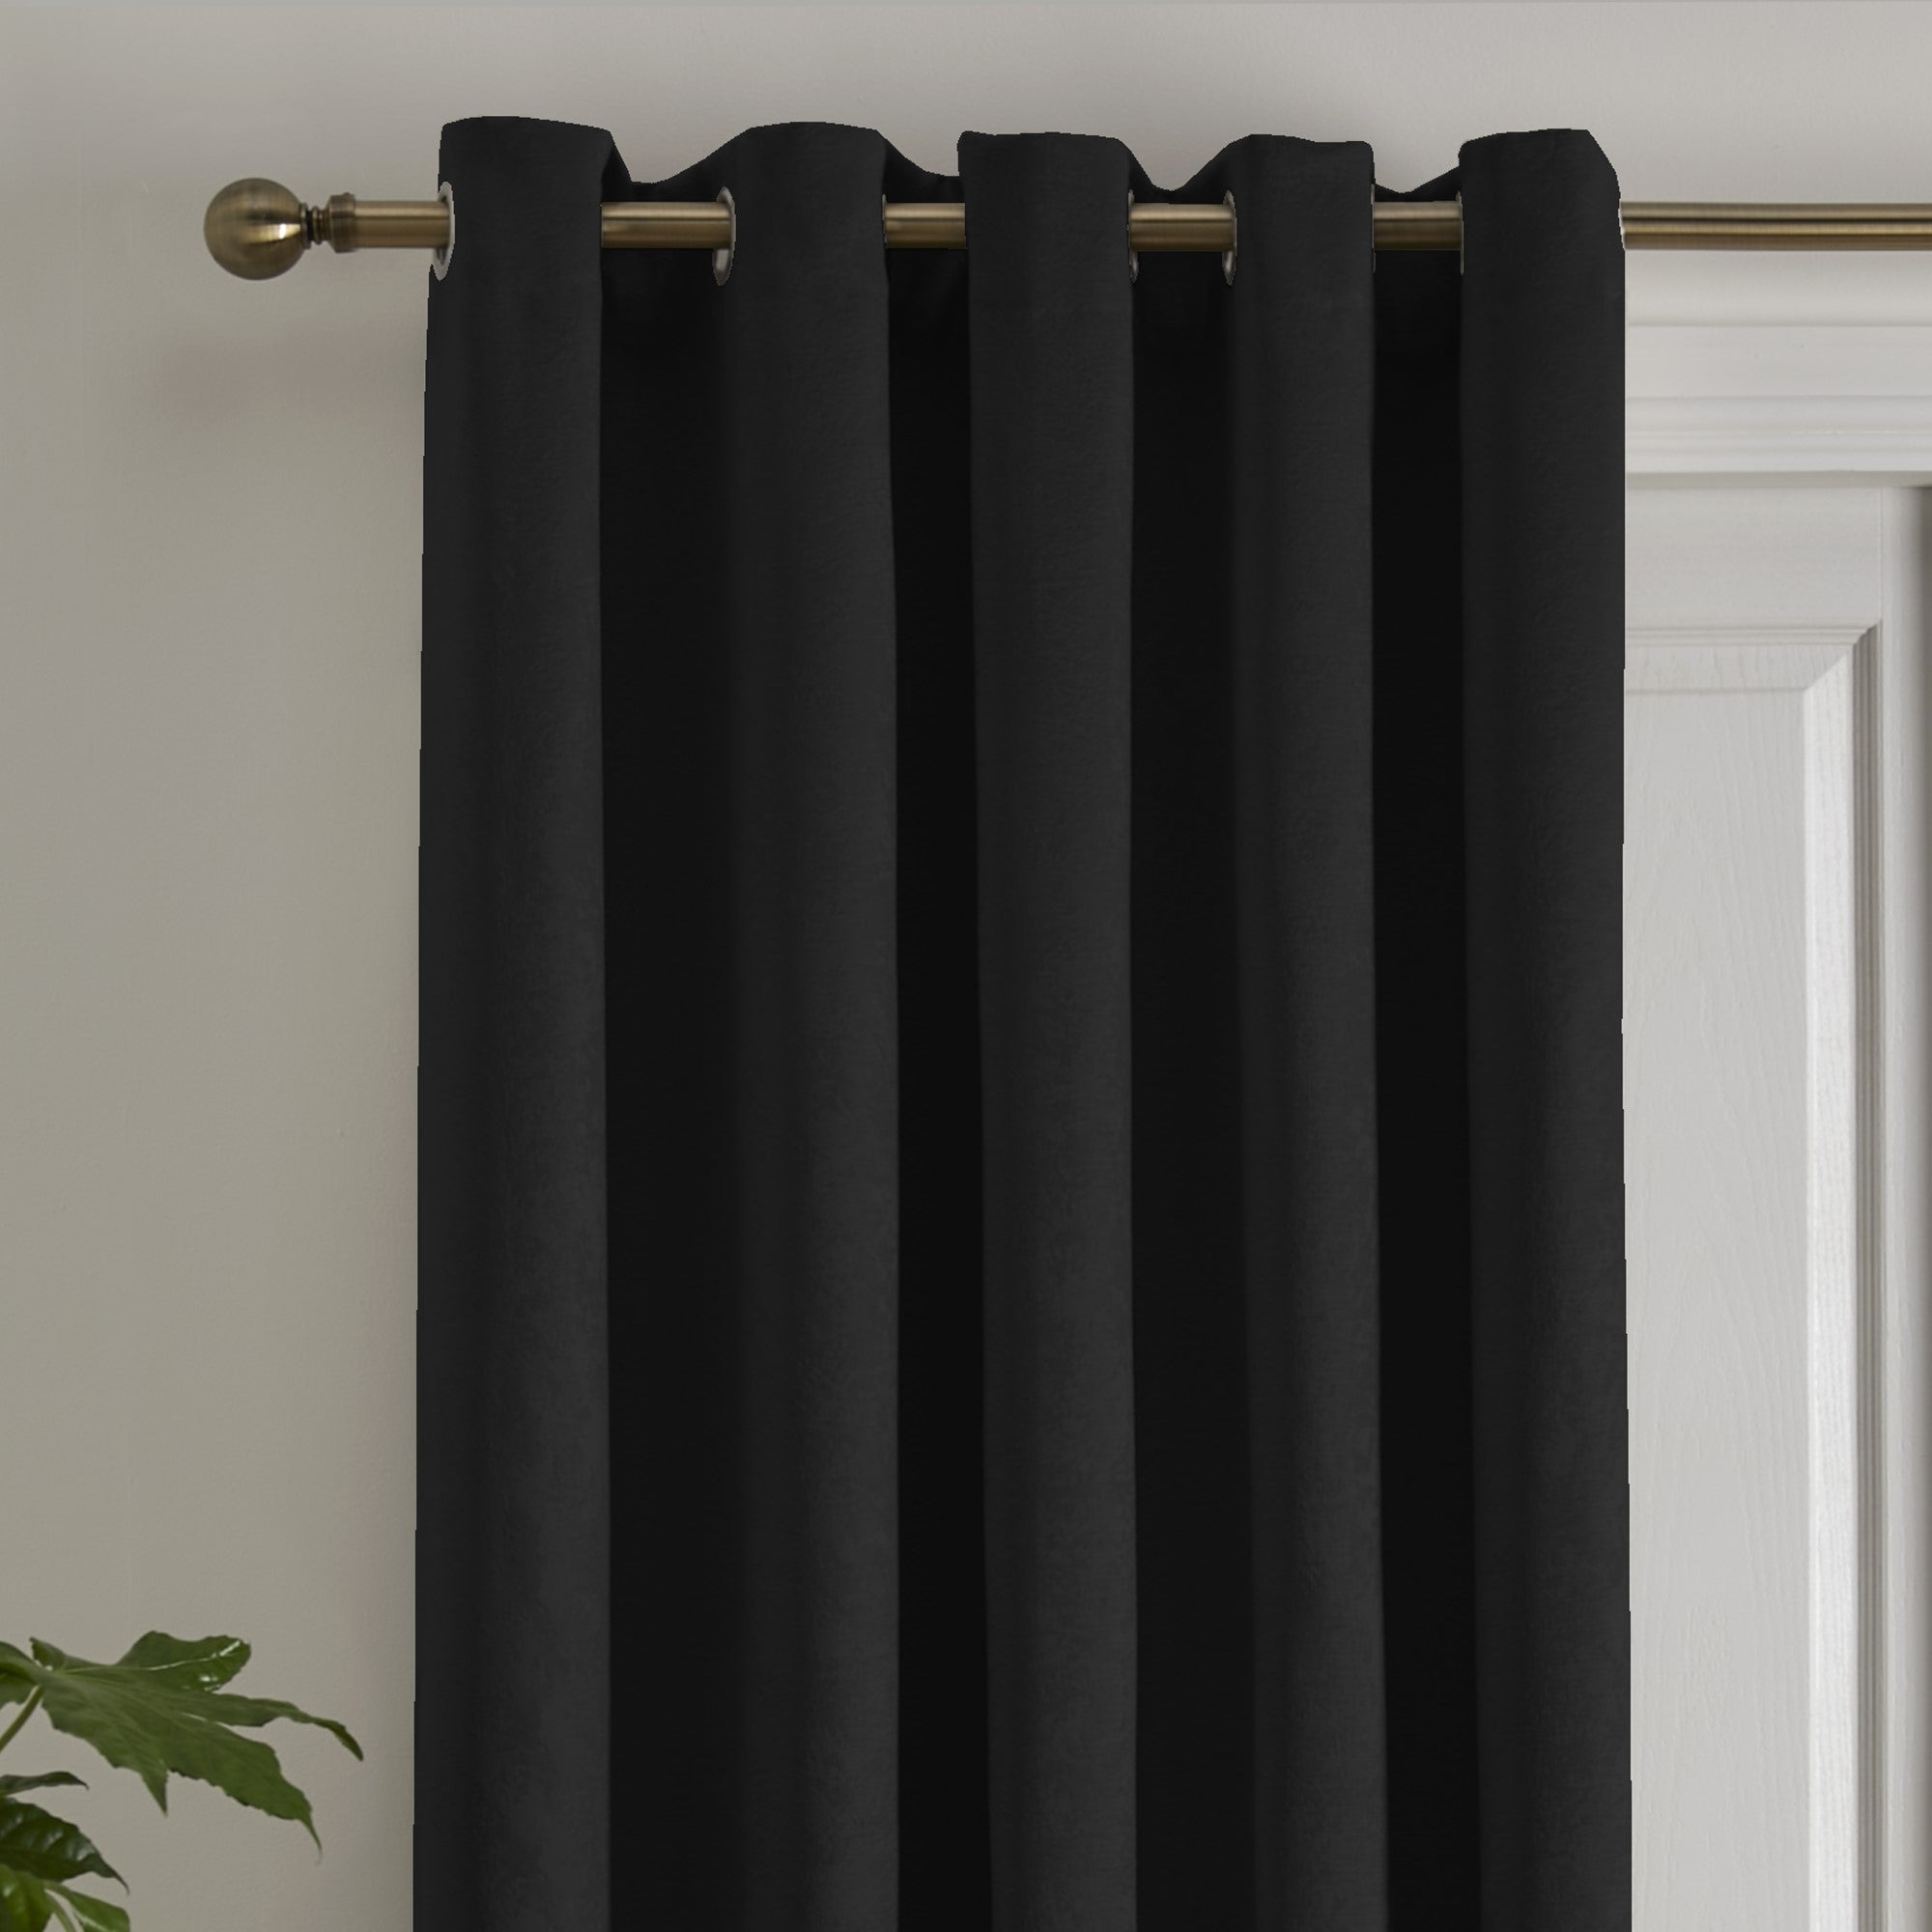 Door Curtains - Browse Our Full Range | Dunelm